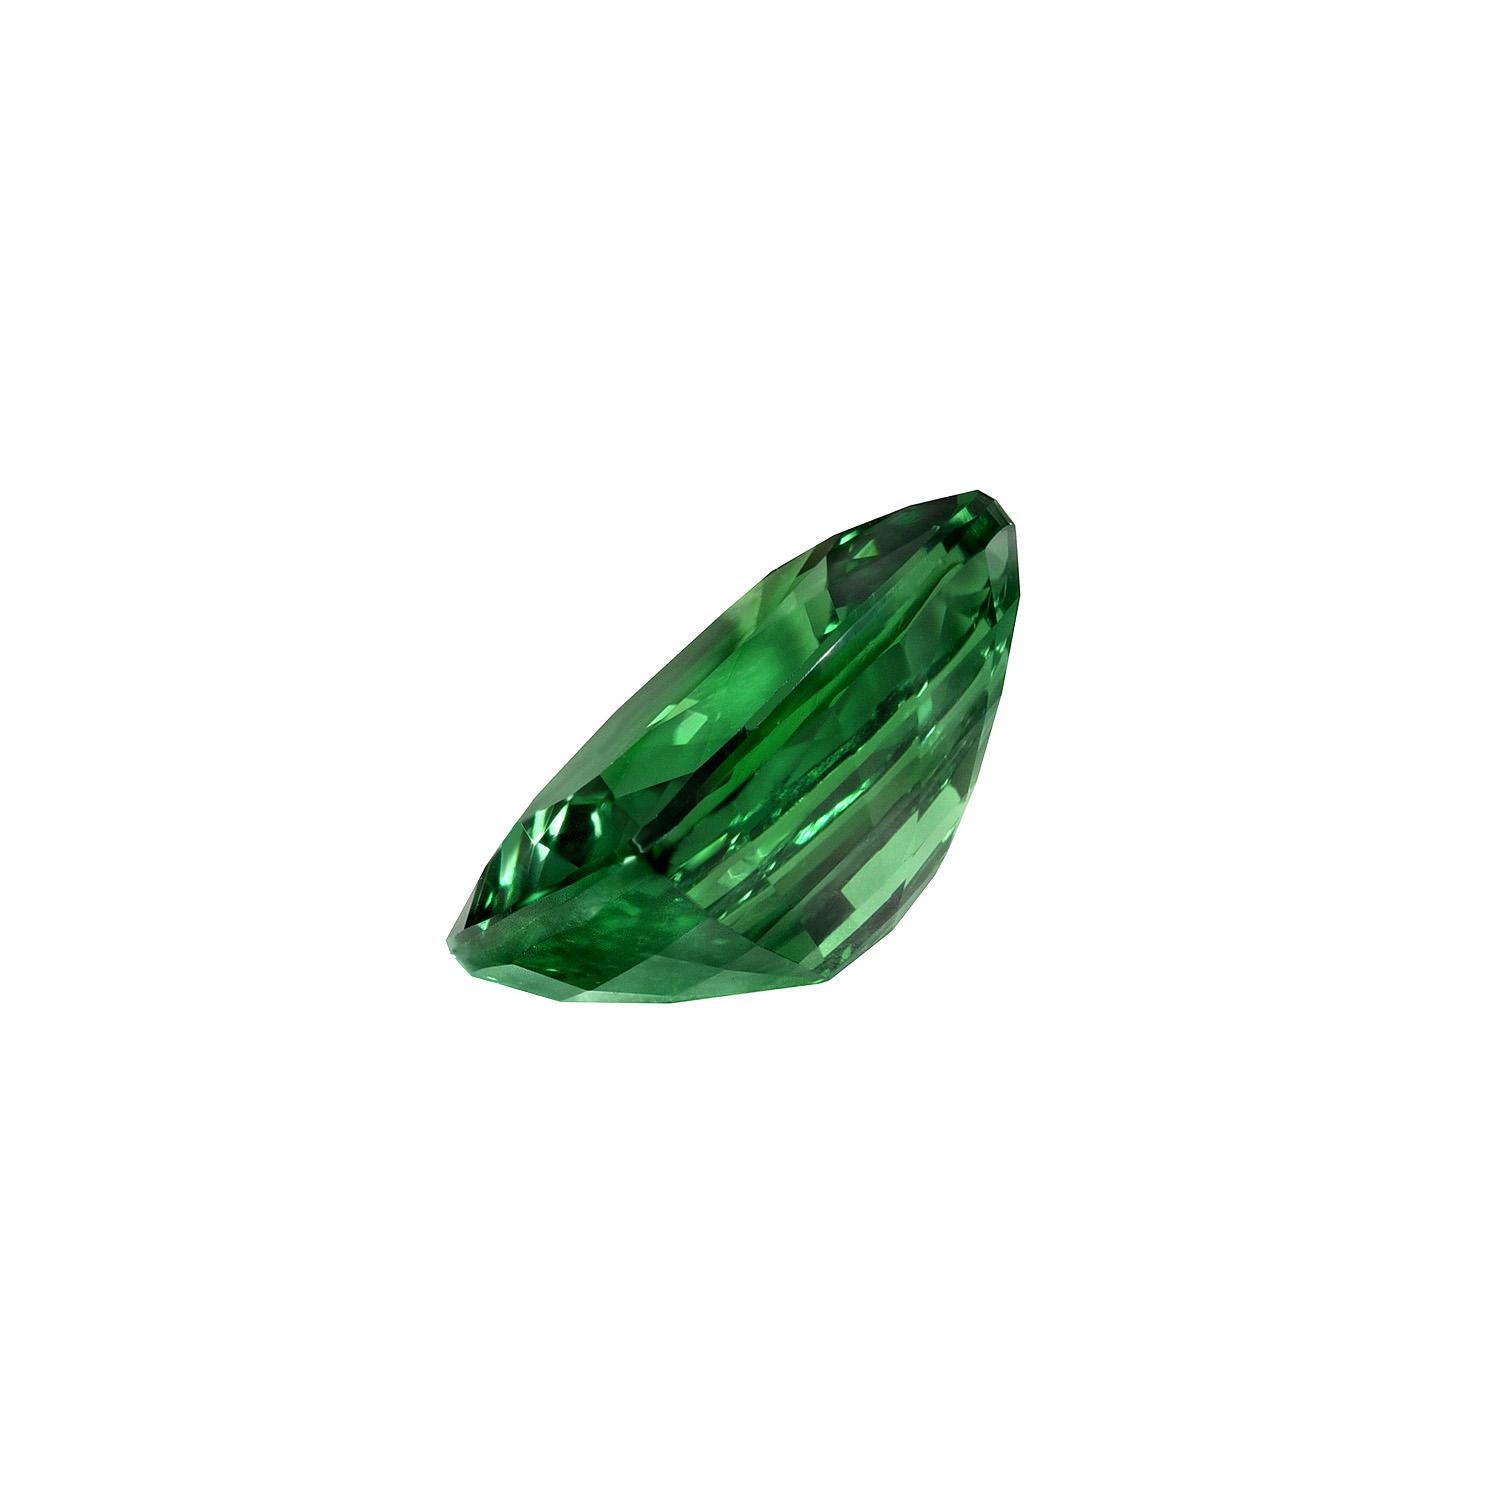 Vibrant 1.96 Carat Tsavorite Garnet cushion gem, offered loose to a world-class gemstone lover.
Returns are accepted and paid by us within 7 days of delivery.
We offer supreme custom jewelry work upon request. Please contact us for more details.
For